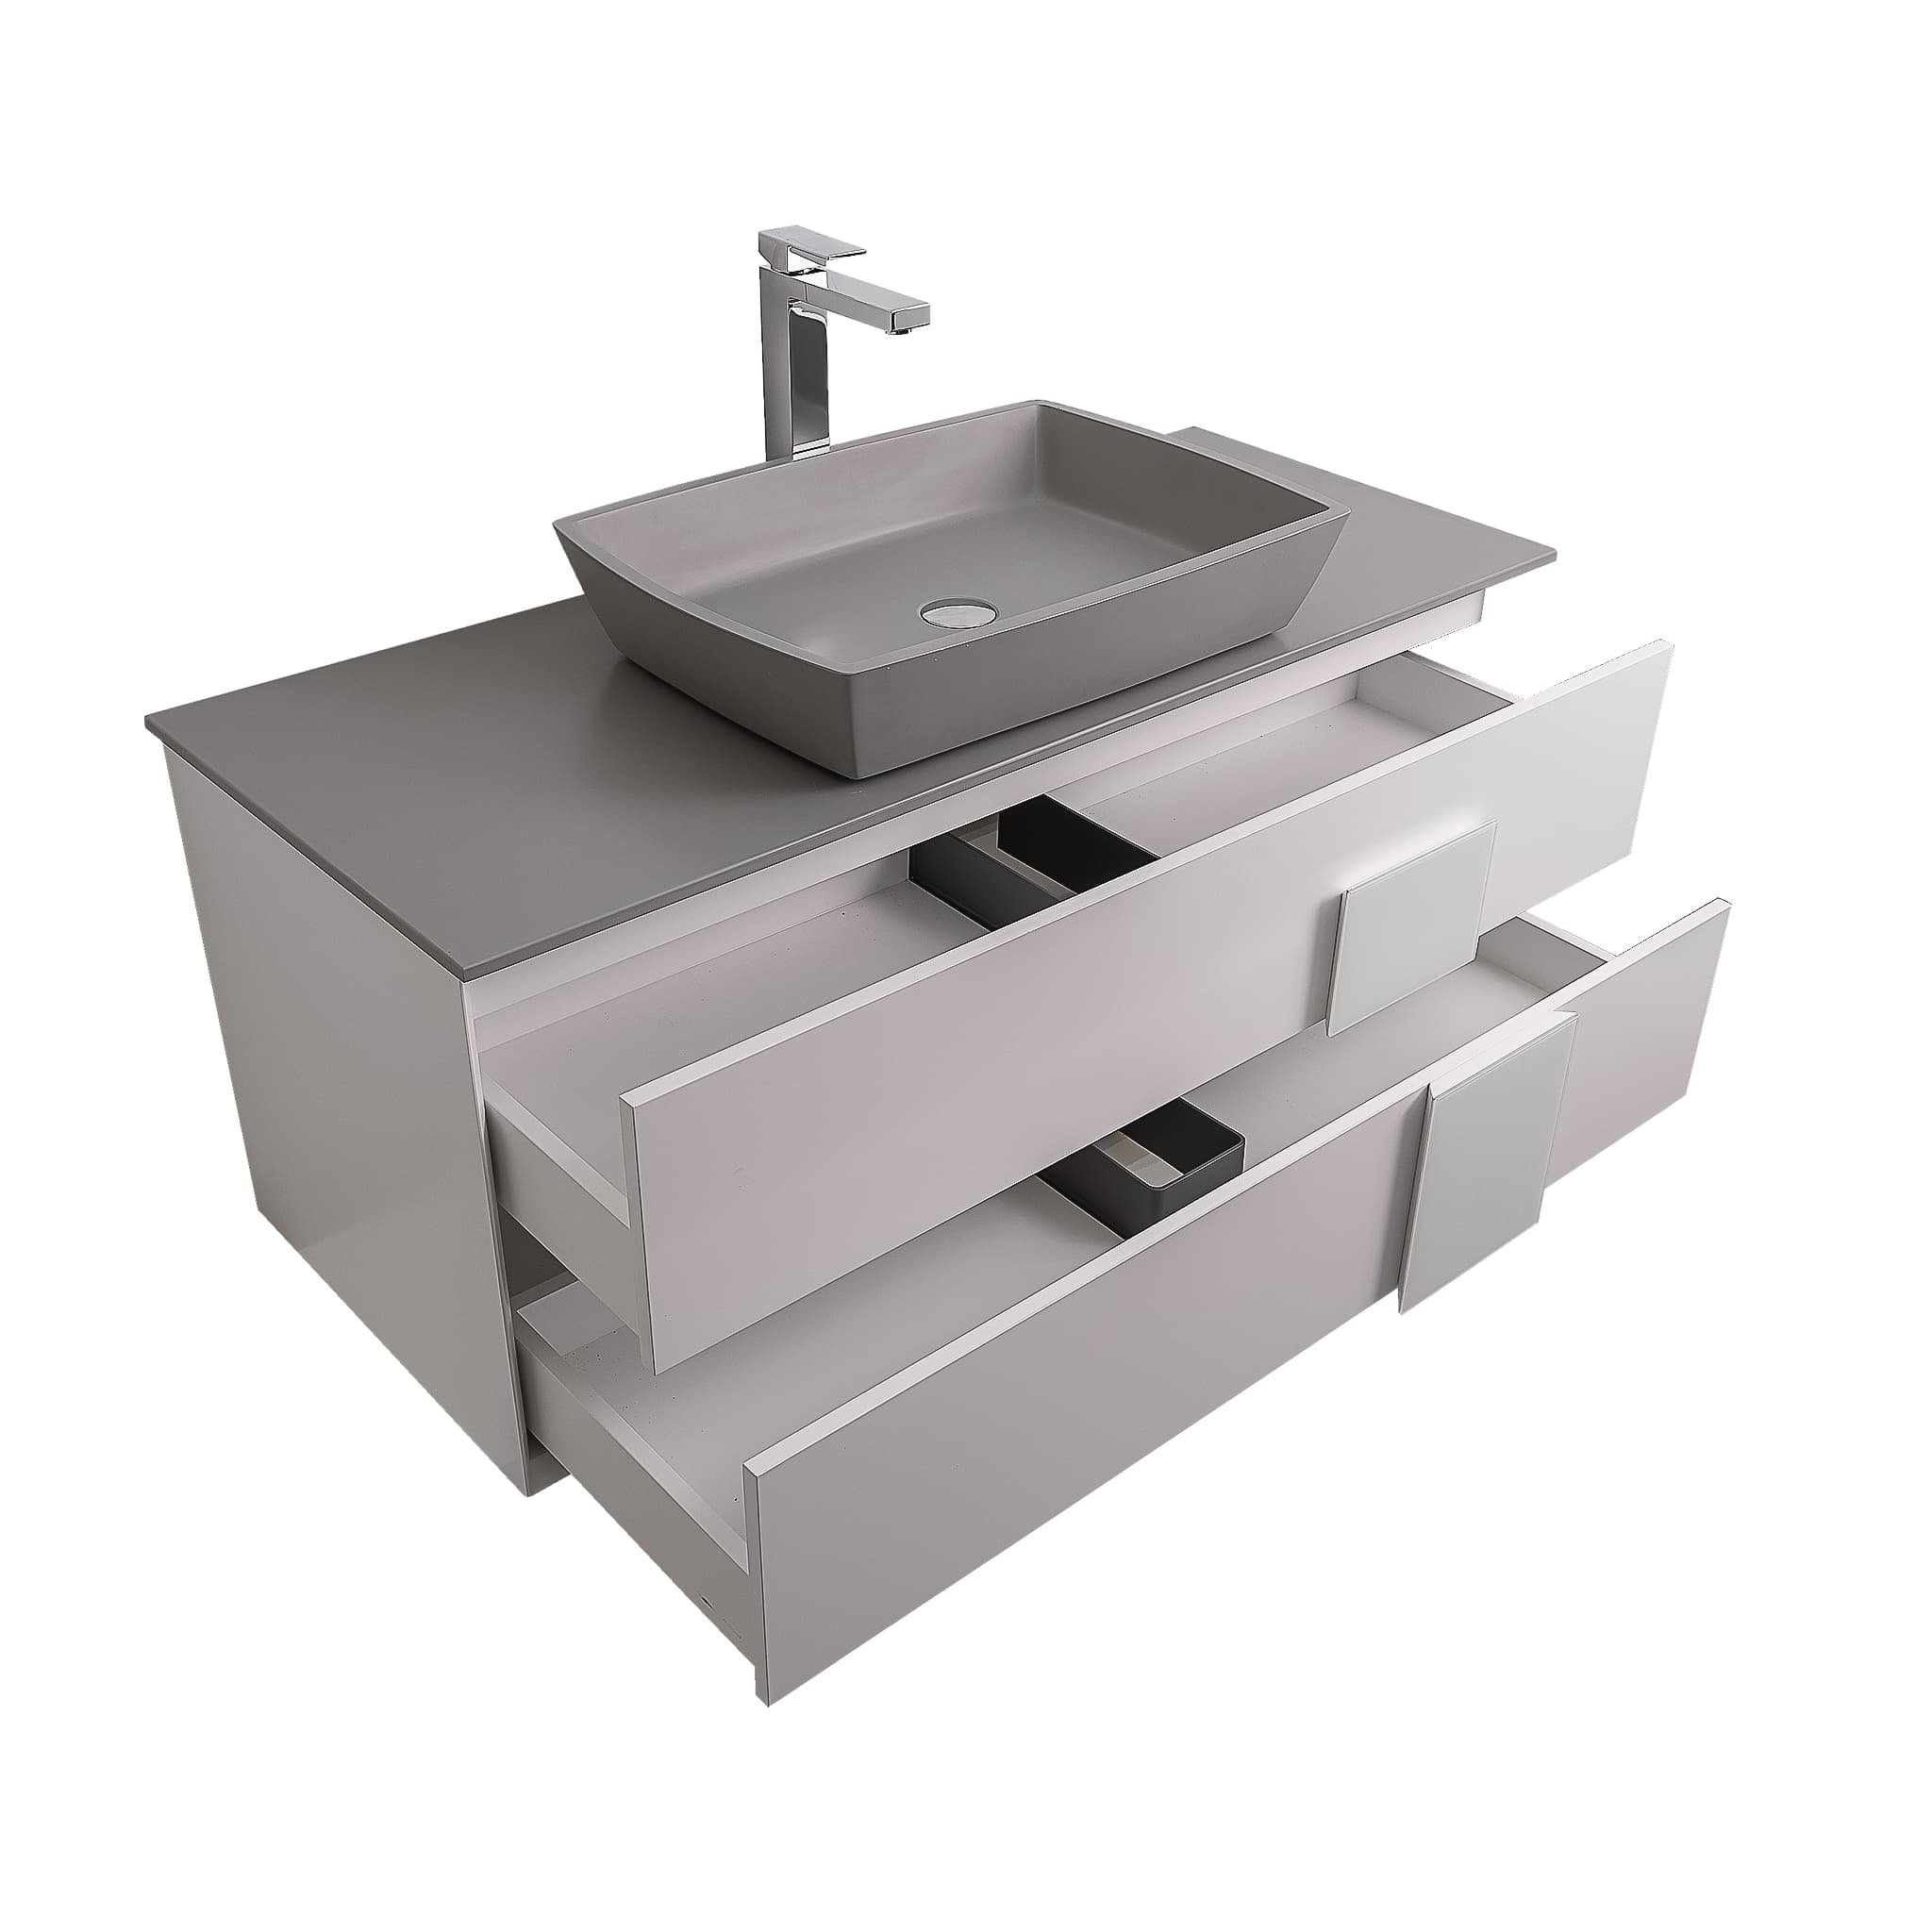 Piazza 47.5 Matte White With White Handle Cabinet, Solid Surface Flat Grey Counter and Square Solid Surface Grey Basin 1316, Wall Mounted Modern Vanity Set